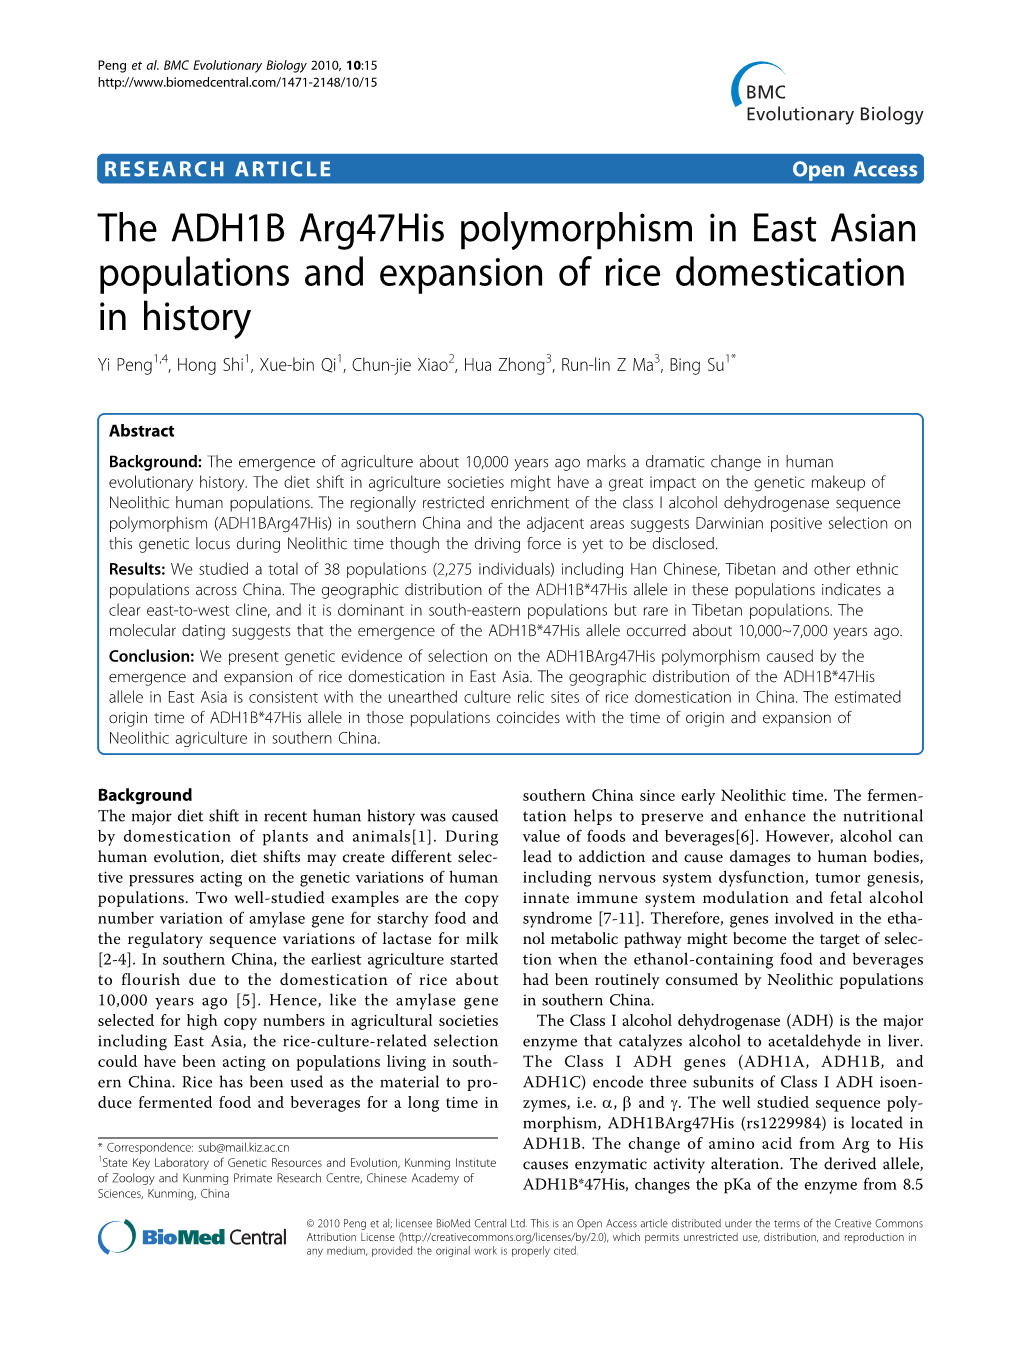 The ADH1B Arg47his Polymorphism in East Asian Populations And